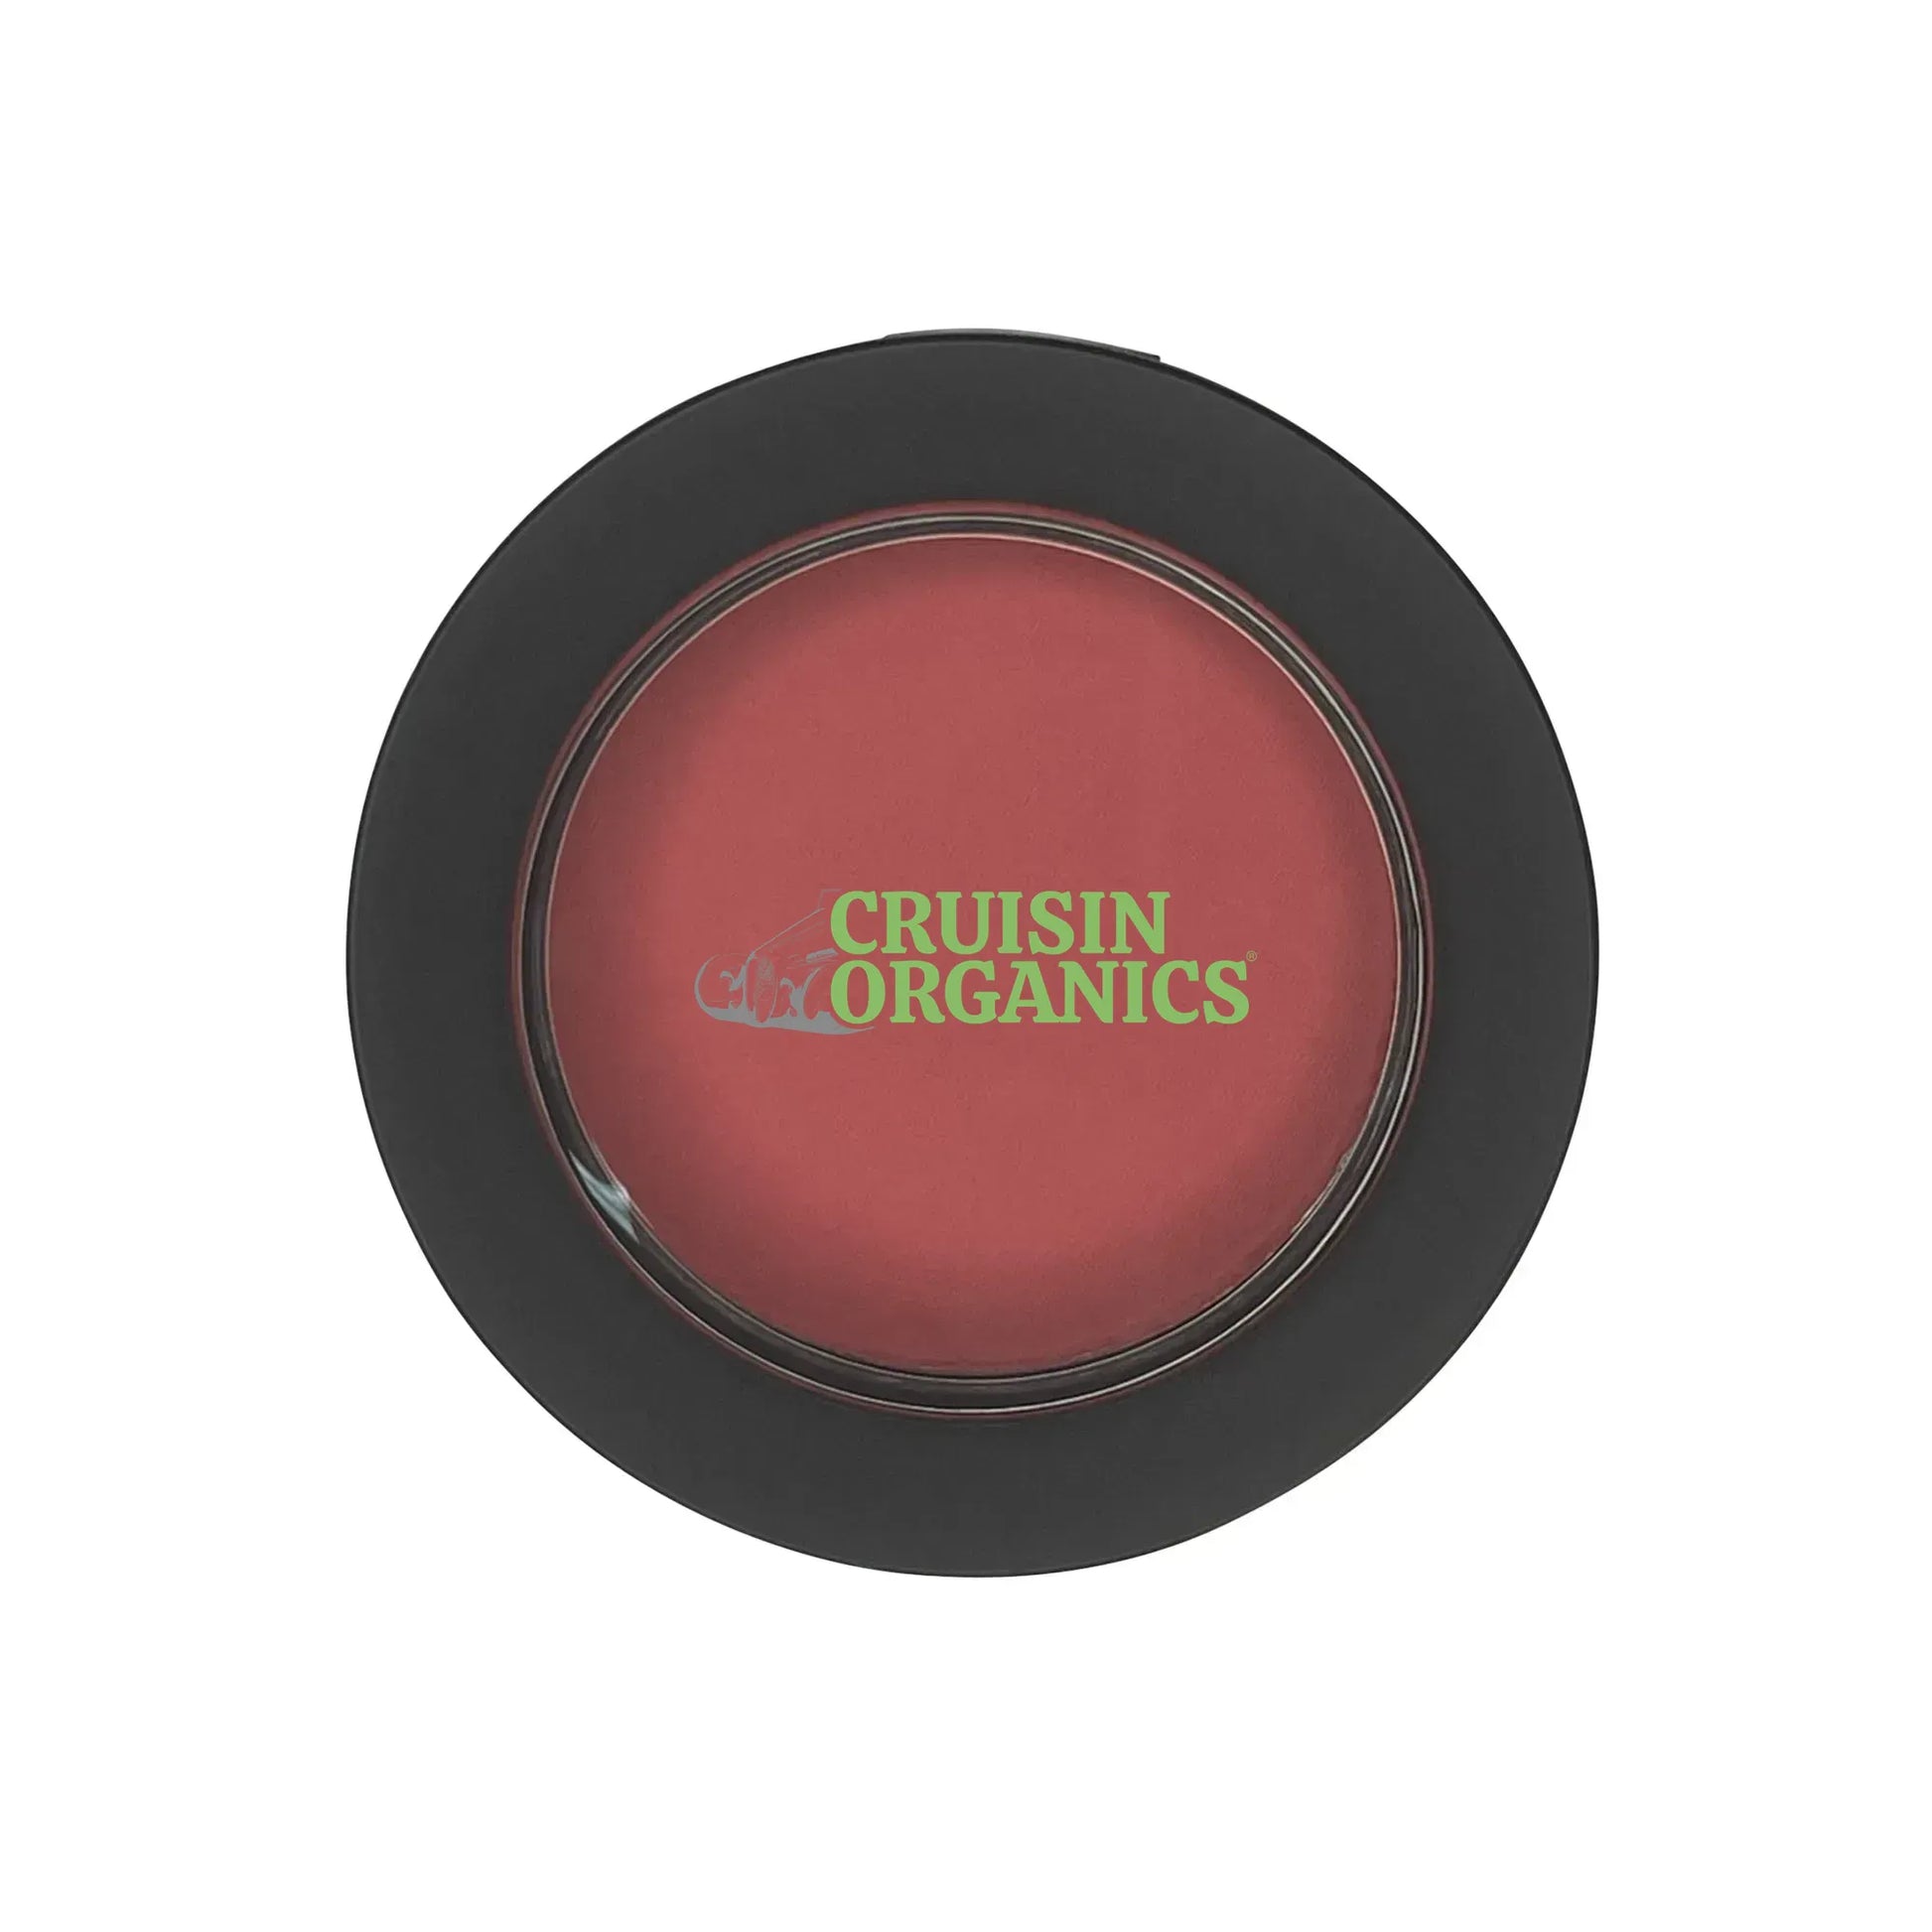 Cruisin Organics Single Pan Blush - Guava  This talc-free blush is a silky, soft-pressed powder that seamlessly blends into your skin! Get the healthy, natural-looking flush your cheeks have always dreamed of. In a single pan, mix and match your favorite blush shades on-the-go for a day trip or a night out. Triple-milled for the finest powder quality, your skin will thank you for your love of clean beauty!